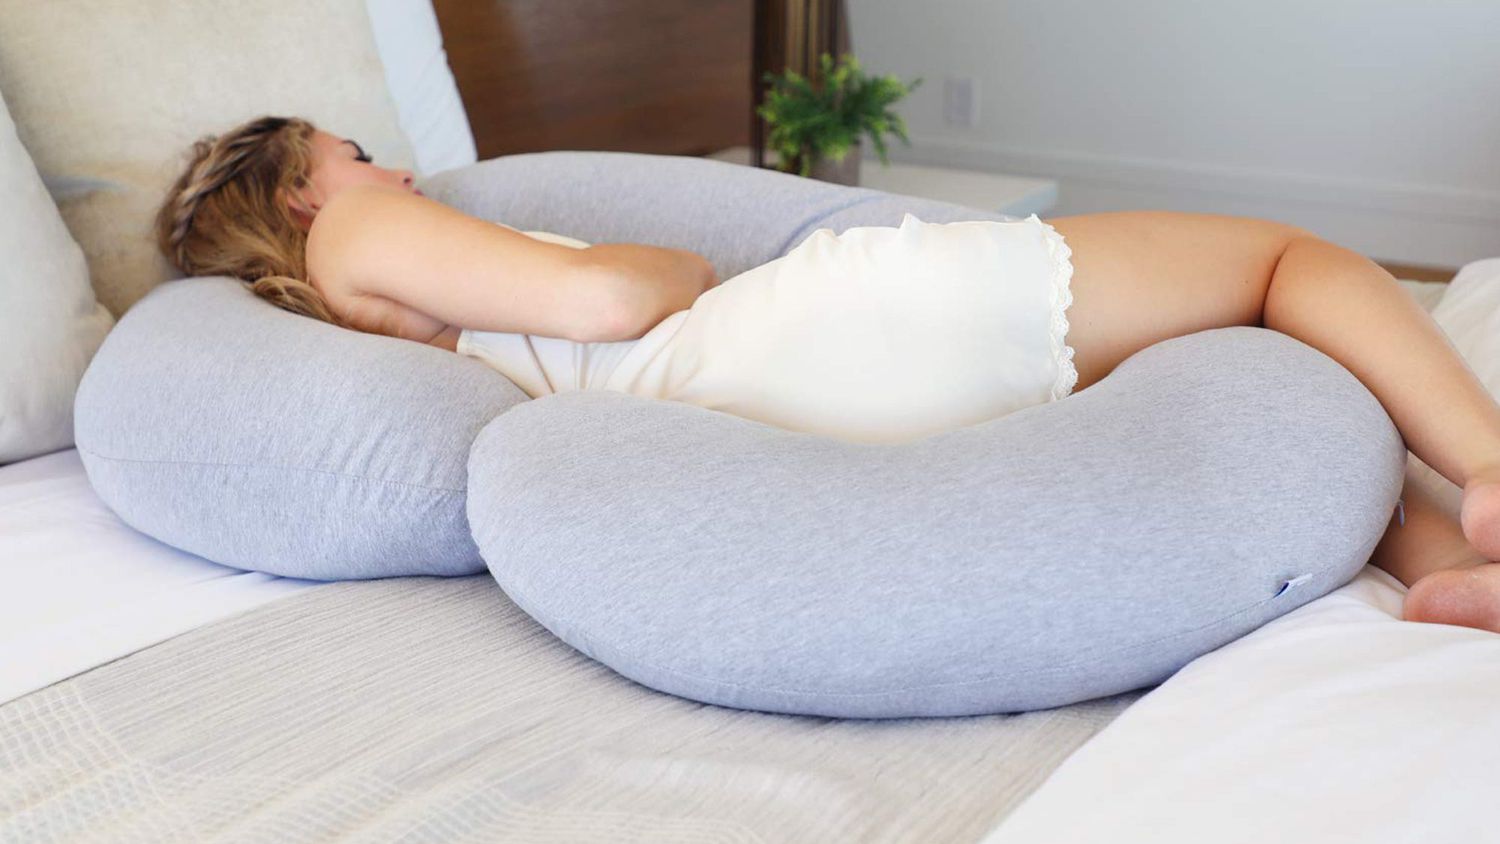 The PharMeDoc Pregnancy Pillow Is “Magical” for Chronic Pain | Real Simple